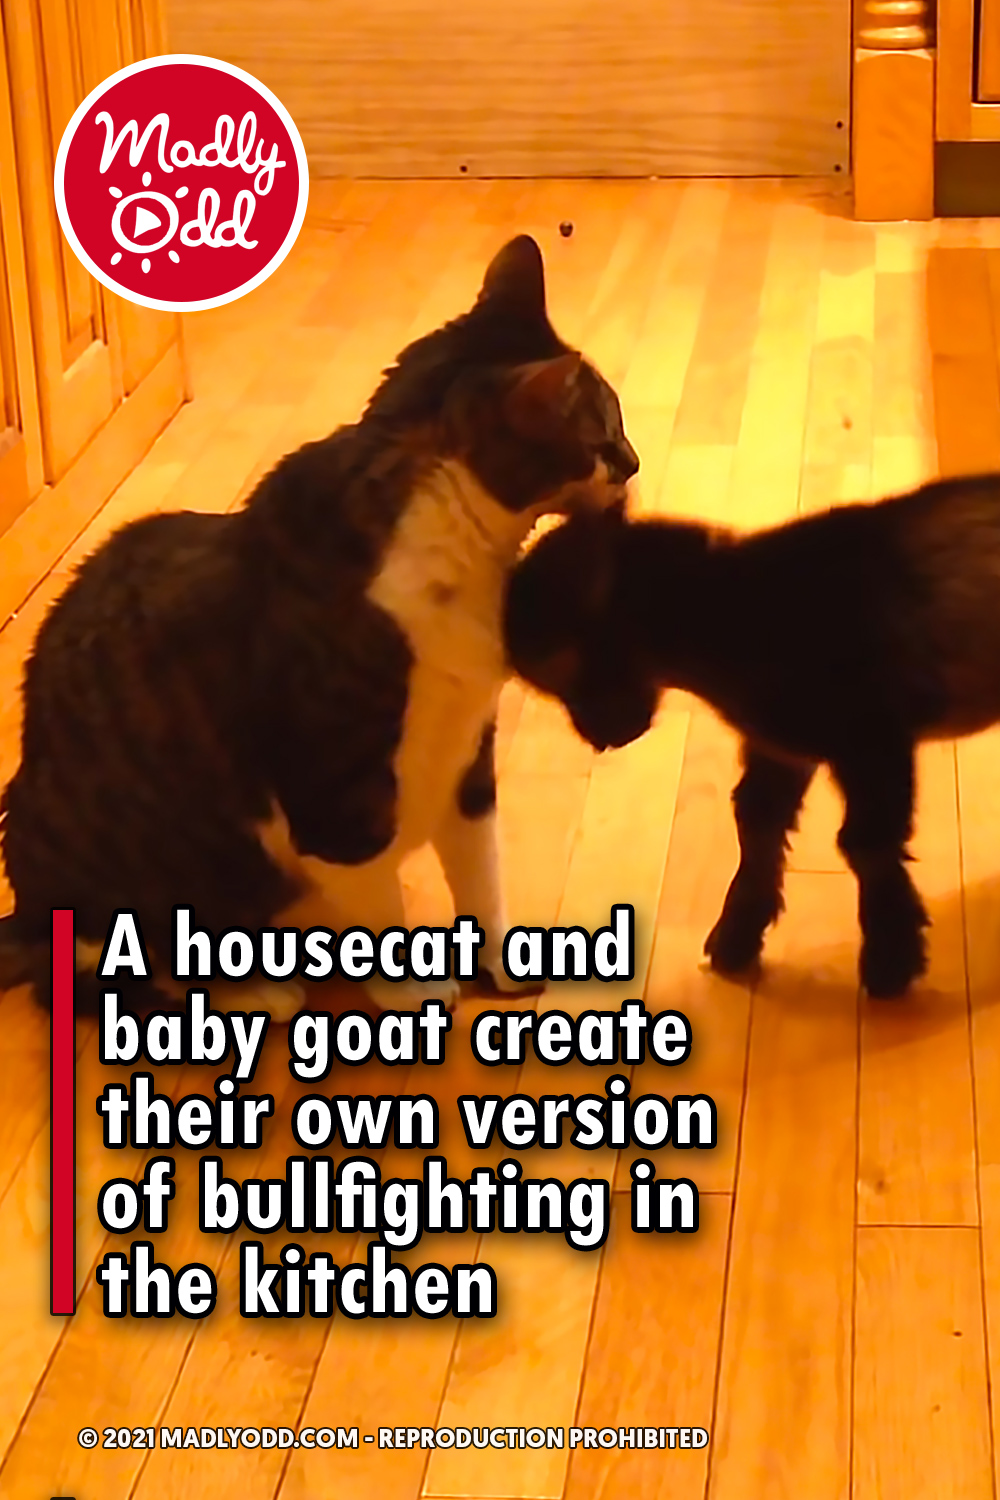 A housecat and baby goat create their own version of bullfighting in the kitchen